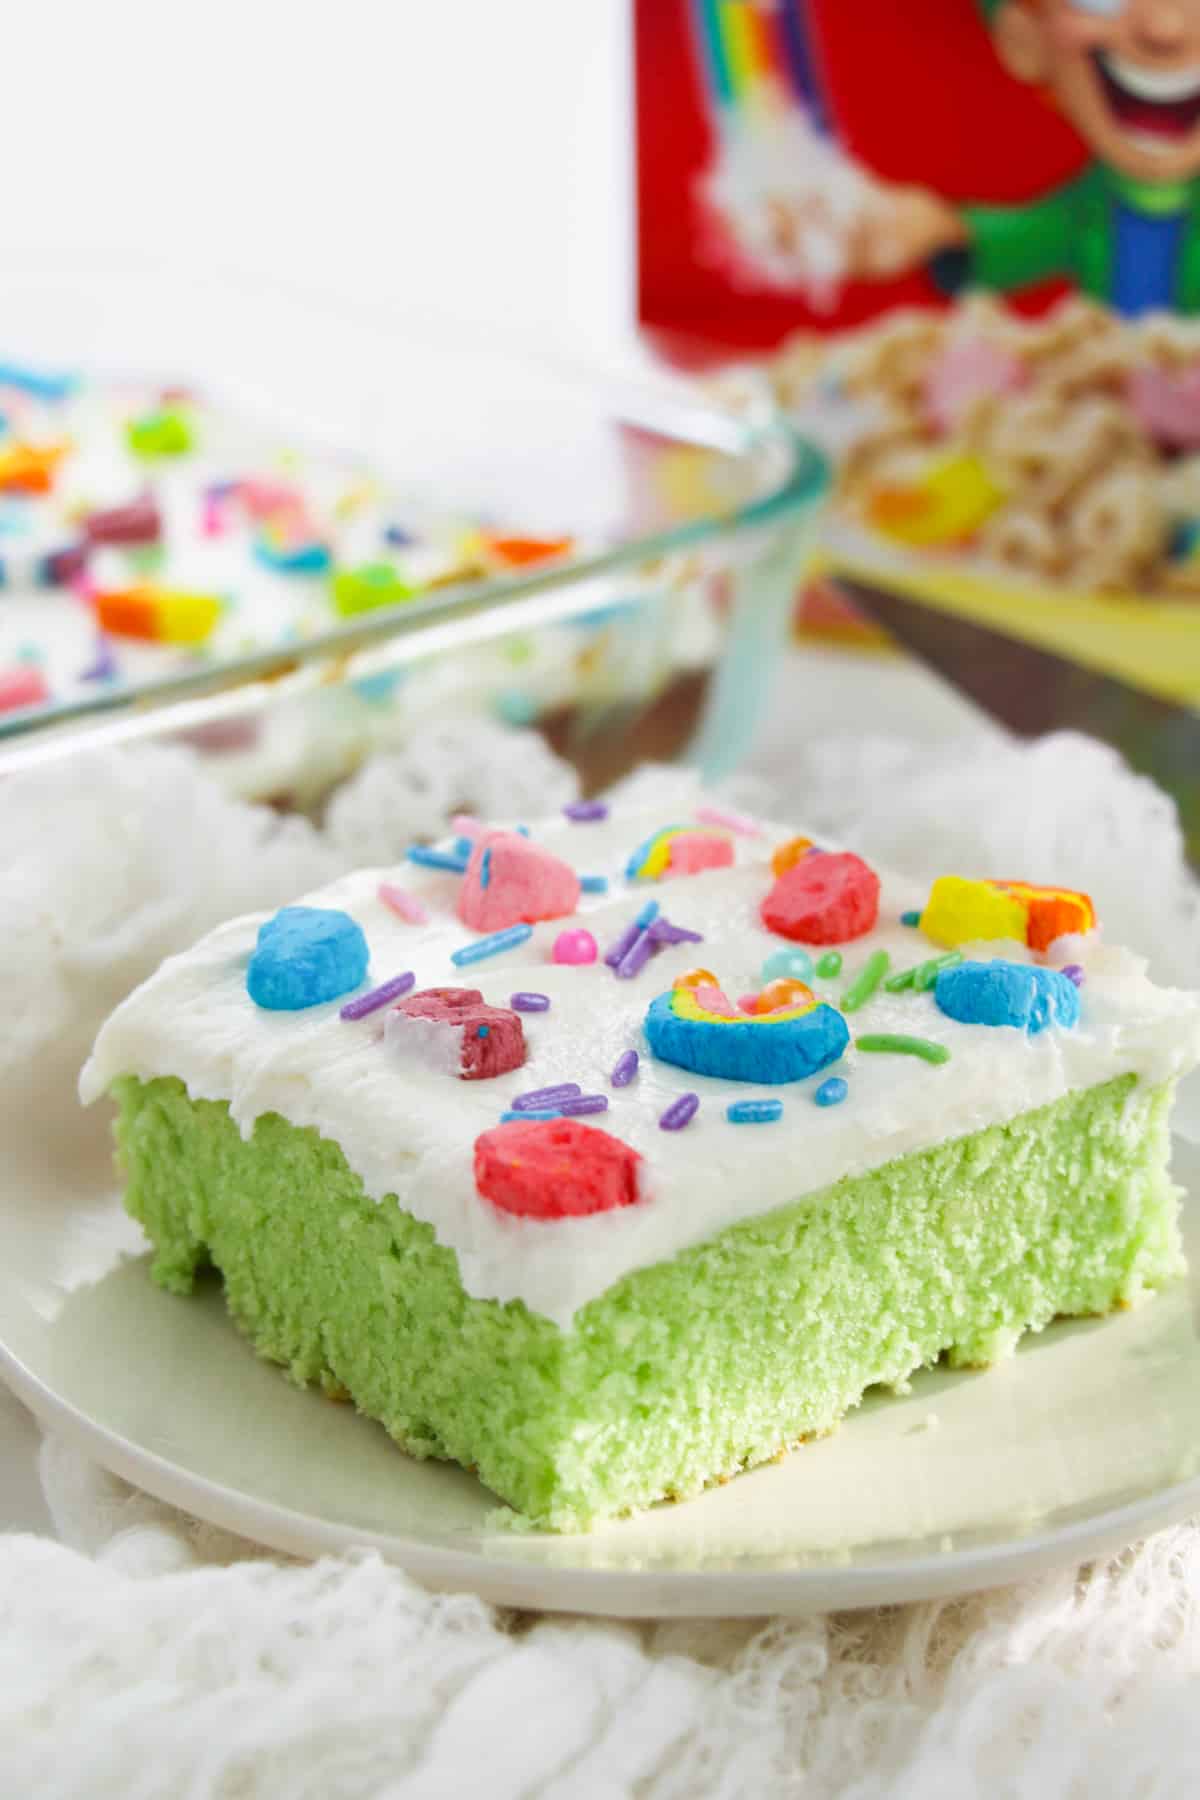 Green Lucky charms cake with white buttercream frosting, rainbow sprinkles, and lucky charms marshmallows on top. Box of Lucky Charms cereal is behind the slice of cake.